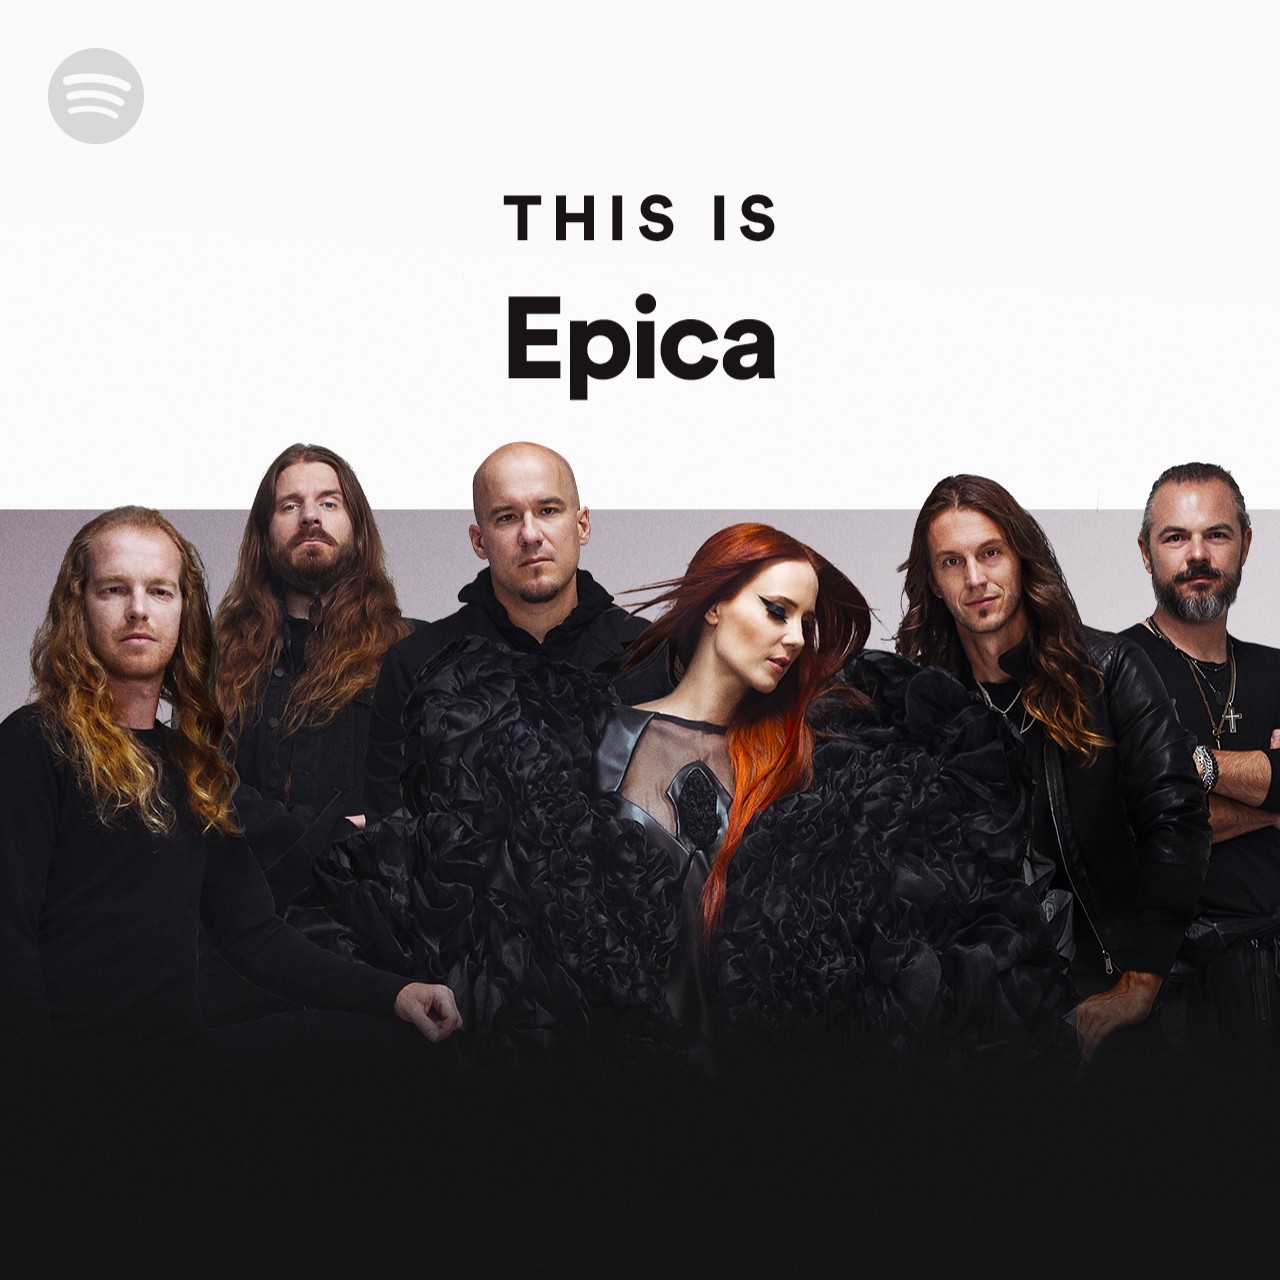 This Is Epica